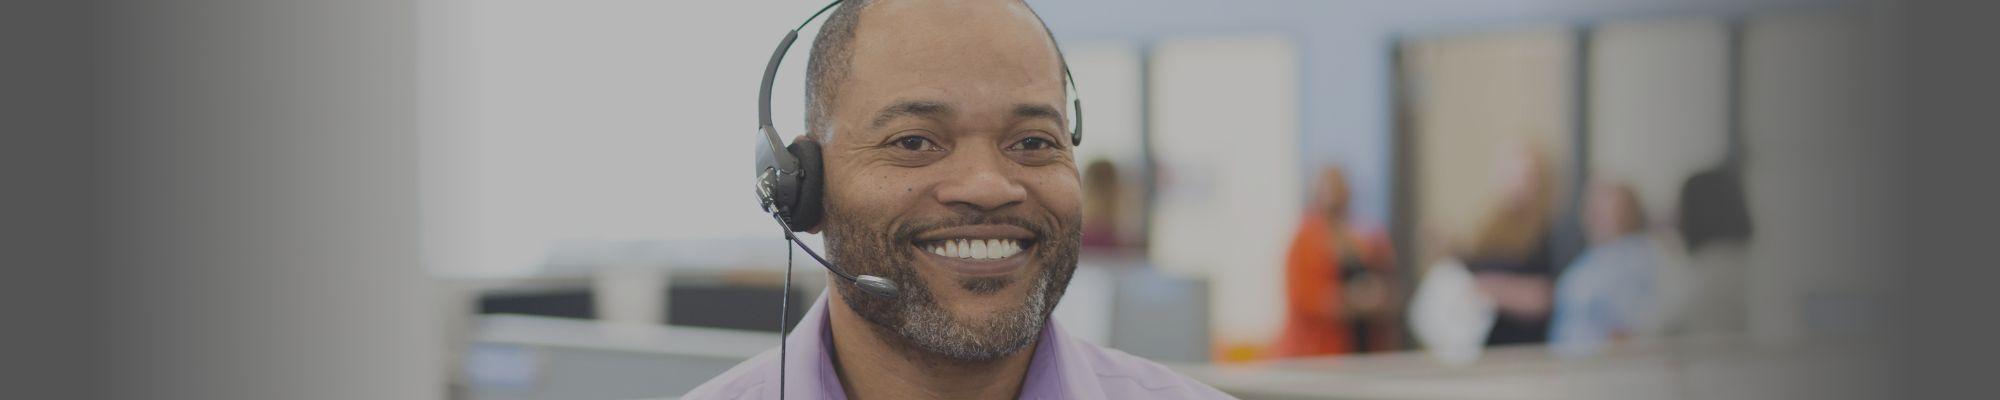 Person smiling with headset